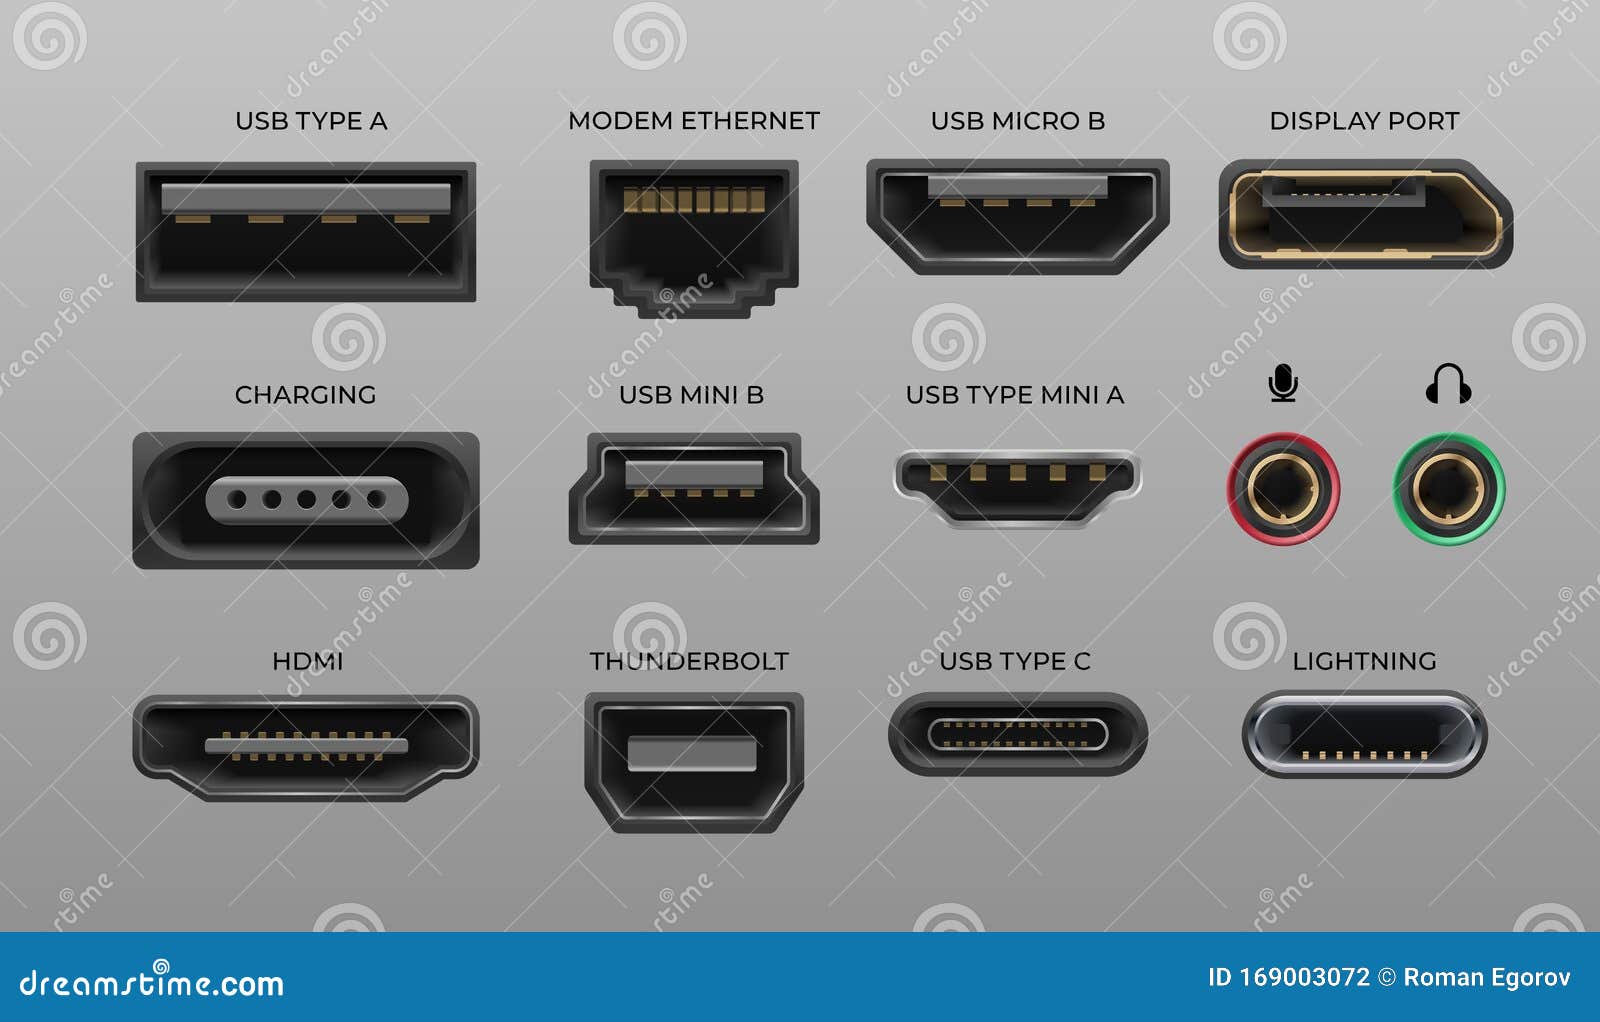 connector and ports. usb type a and type c, video ports hand drawnmi dvi and displayport, audio coaxial, thunderbolt and